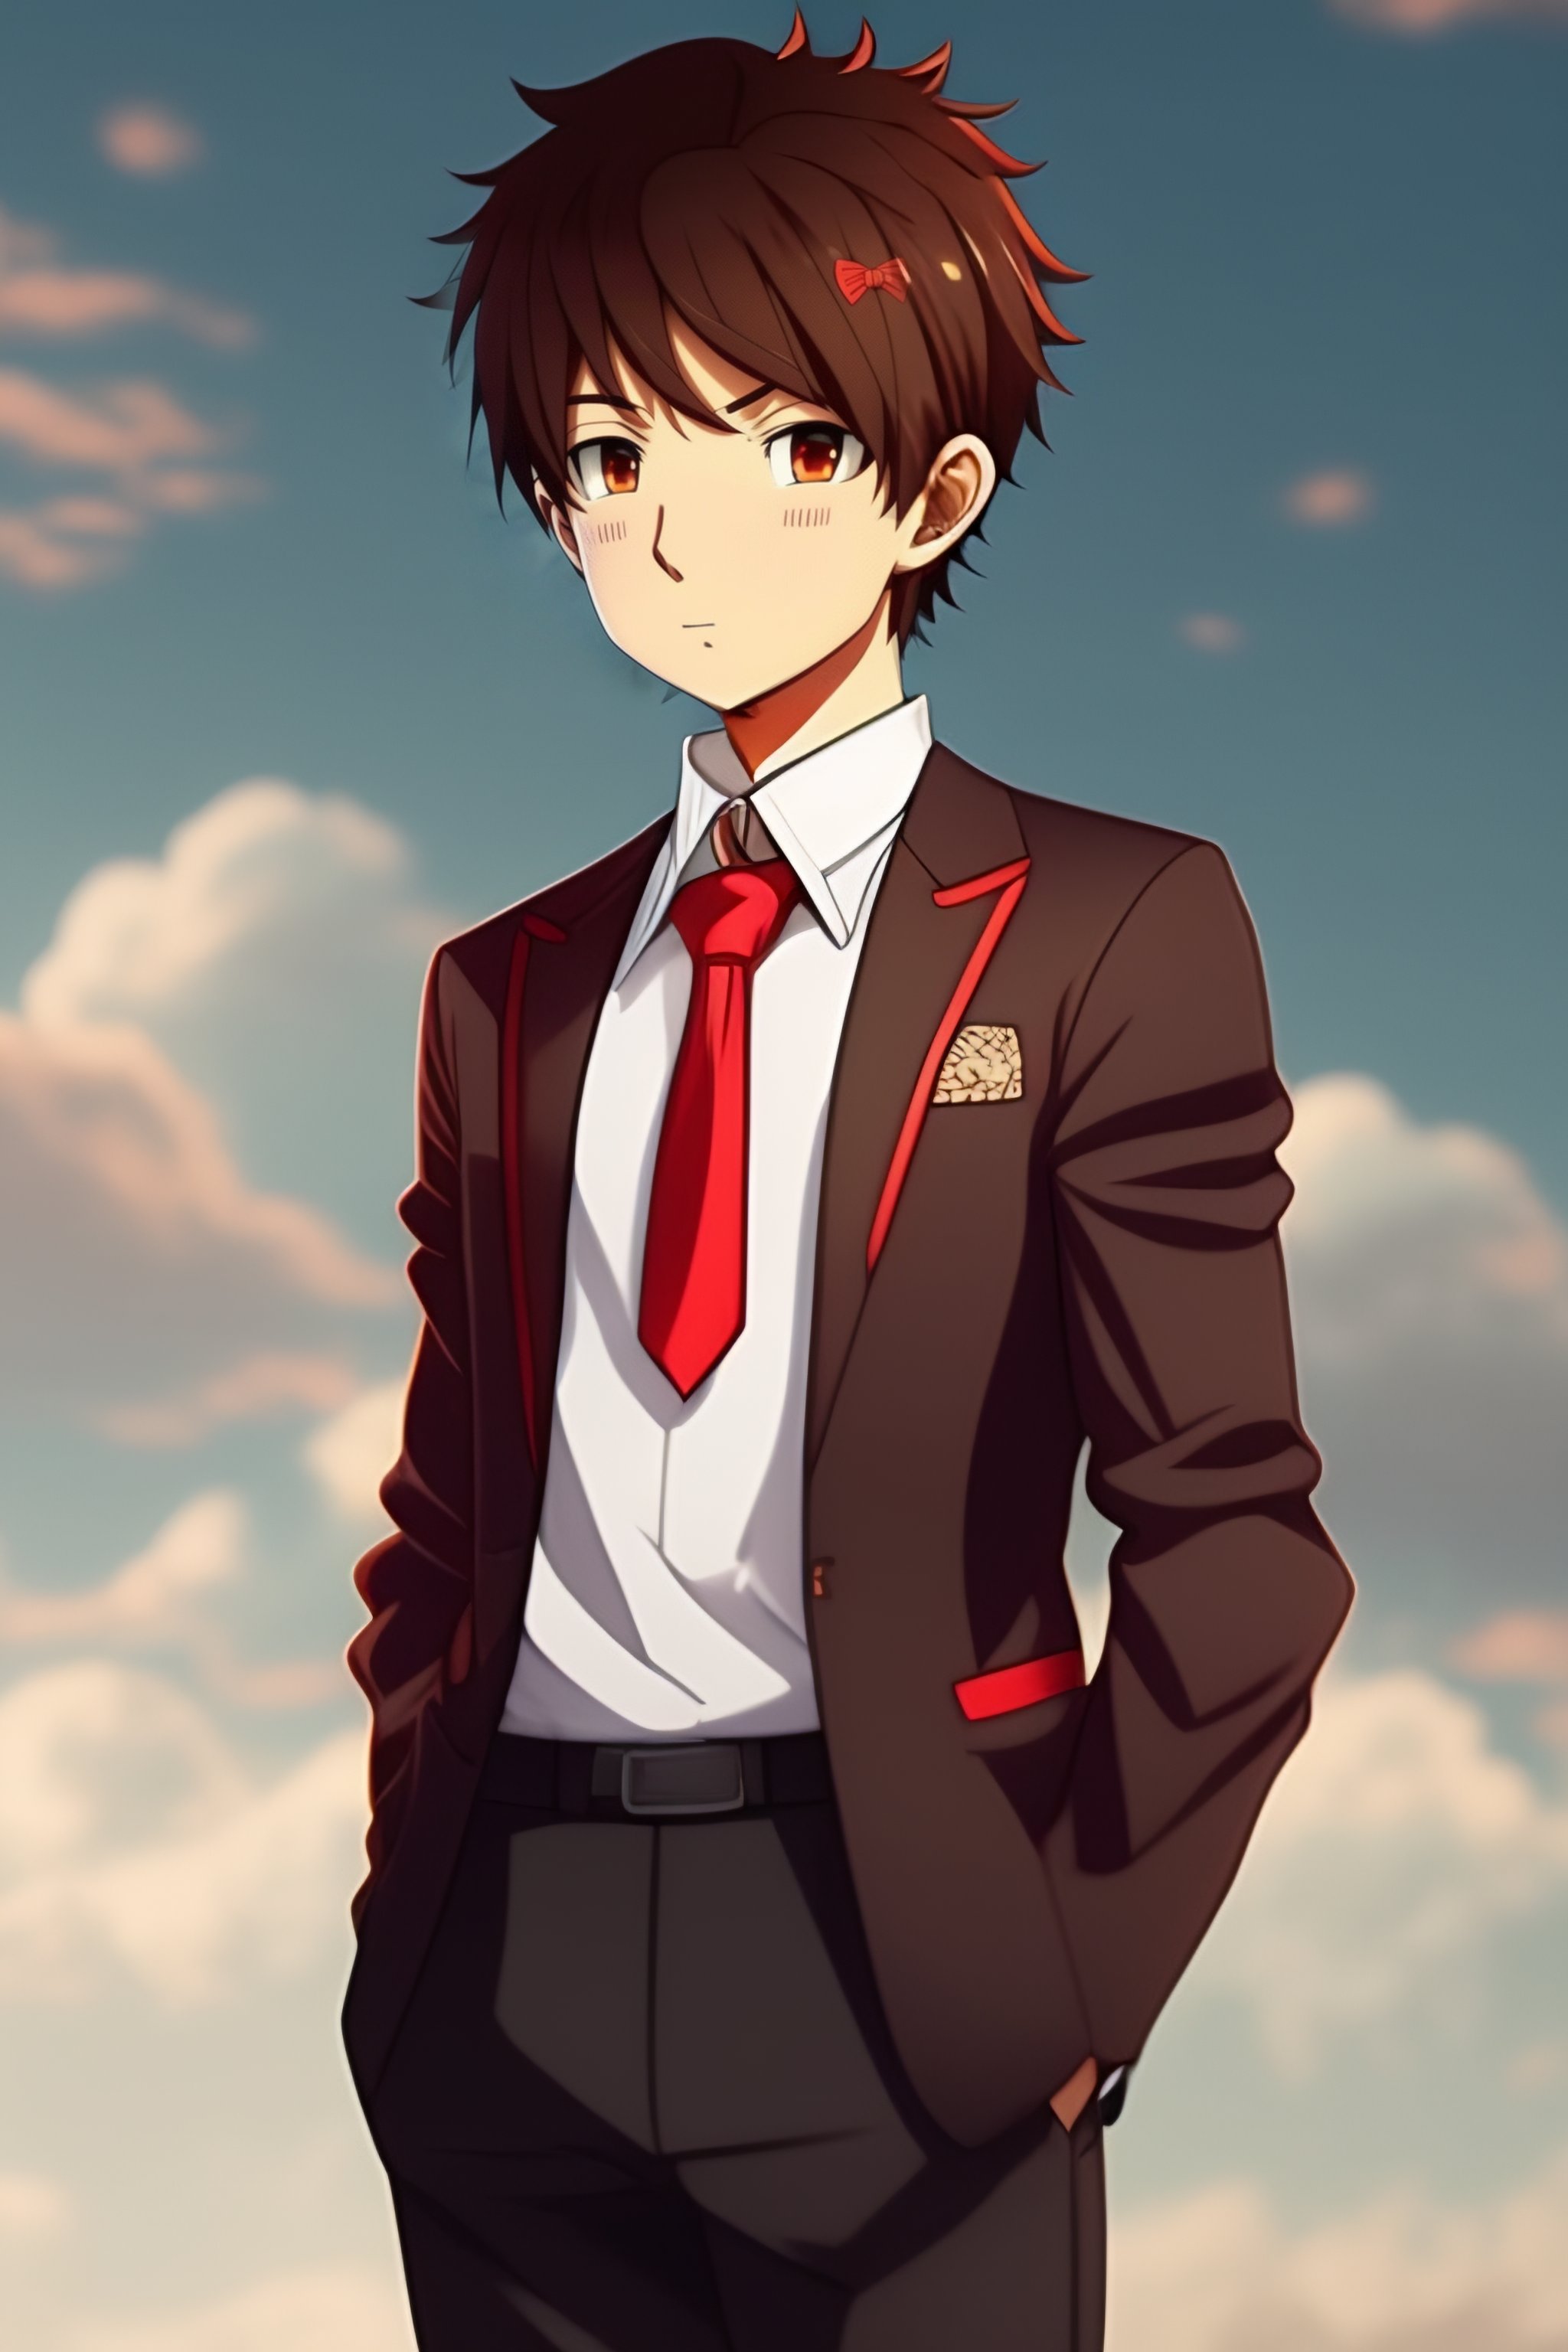 Lexica - Anime boy with brown hair, 12 year old.